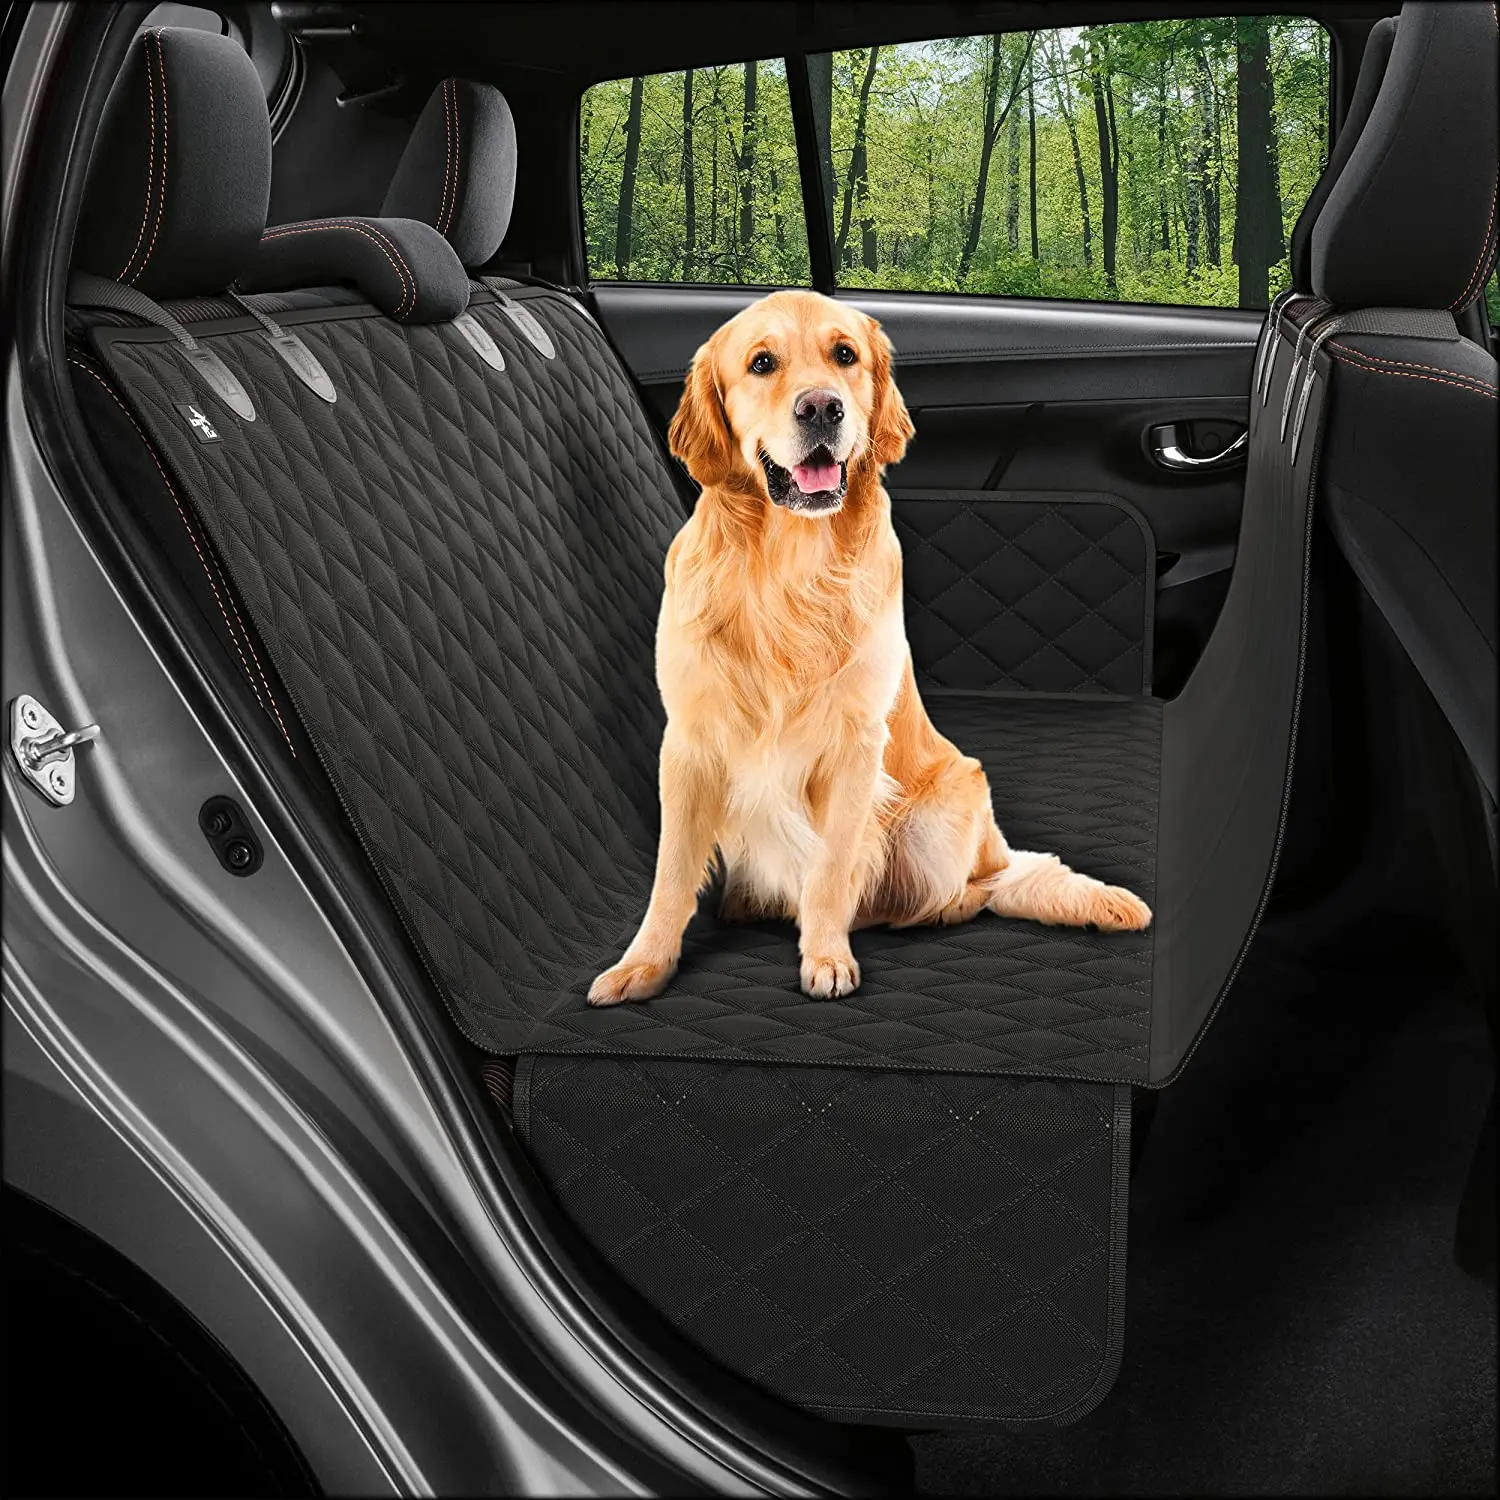 

Protector Waterproof Nonslip Hammock for Dogs Backseat Protection Against Dirt and Pet Dog Seat Cover For Back Seat, Black